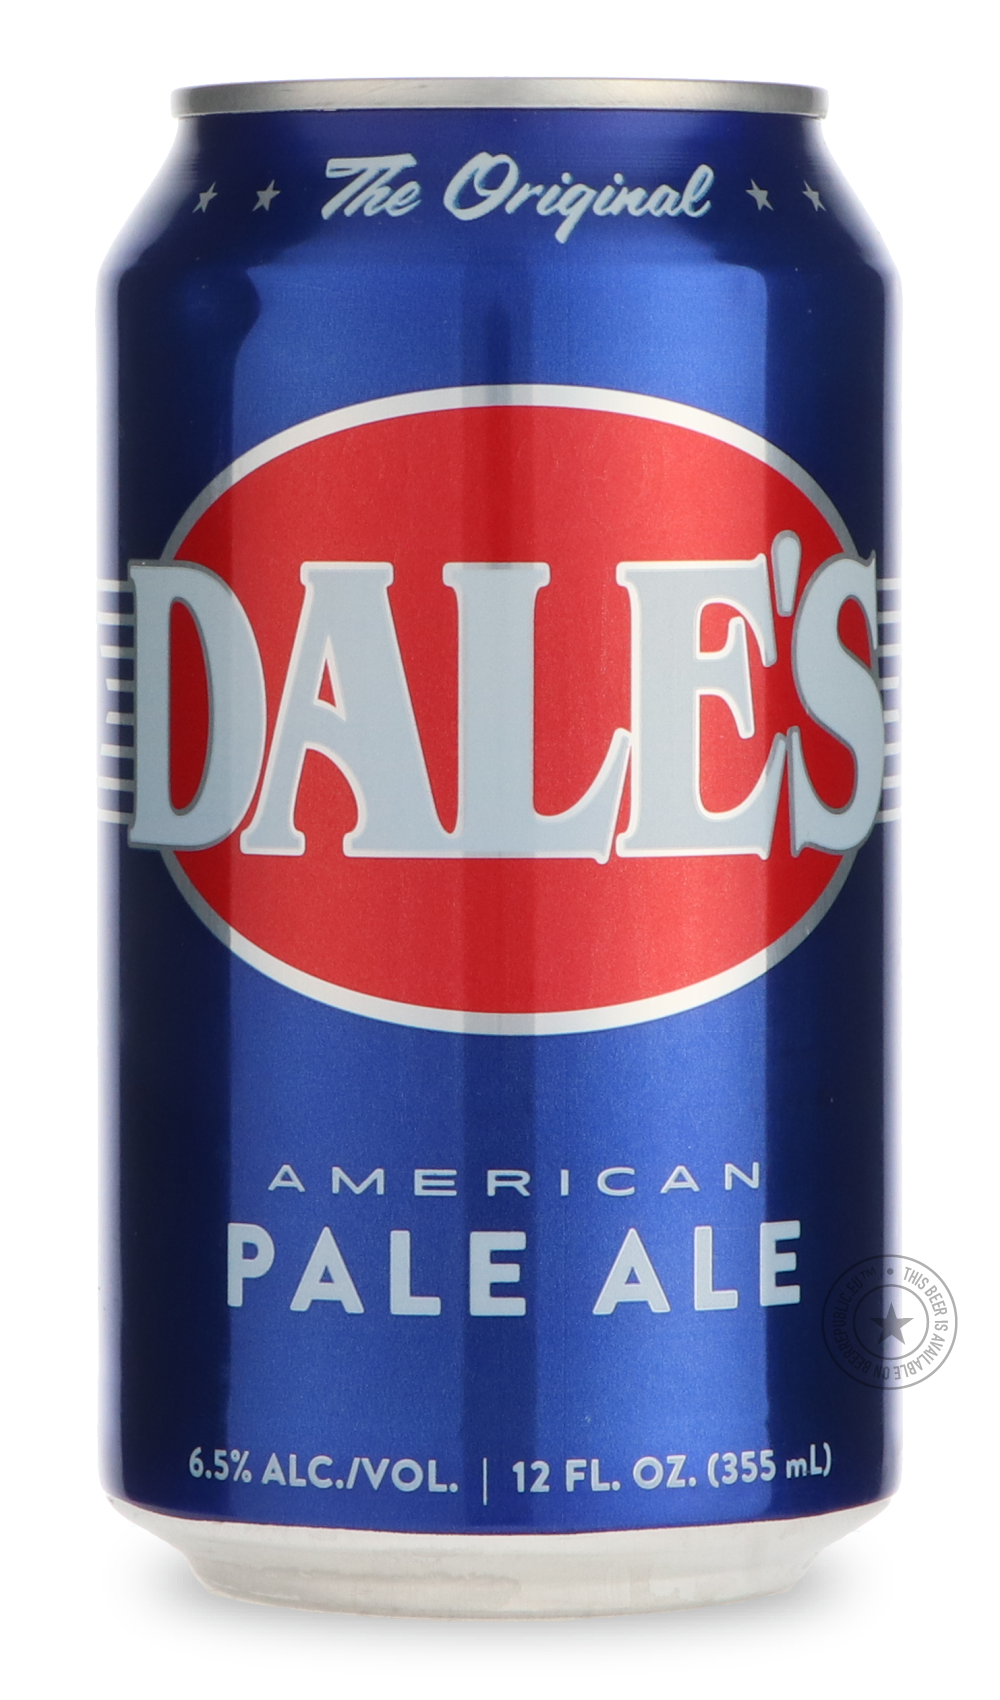 -Oskar Blues- Dale's® Pale Ale-Pale- Only @ Beer Republic - The best online beer store for American & Canadian craft beer - Buy beer online from the USA and Canada - Bier online kopen - Amerikaans bier kopen - Craft beer store - Craft beer kopen - Amerikanisch bier kaufen - Bier online kaufen - Acheter biere online - IPA - Stout - Porter - New England IPA - Hazy IPA - Imperial Stout - Barrel Aged - Barrel Aged Imperial Stout - Brown - Dark beer - Blond - Blonde - Pilsner - Lager - Wheat - Weizen - Amber - B